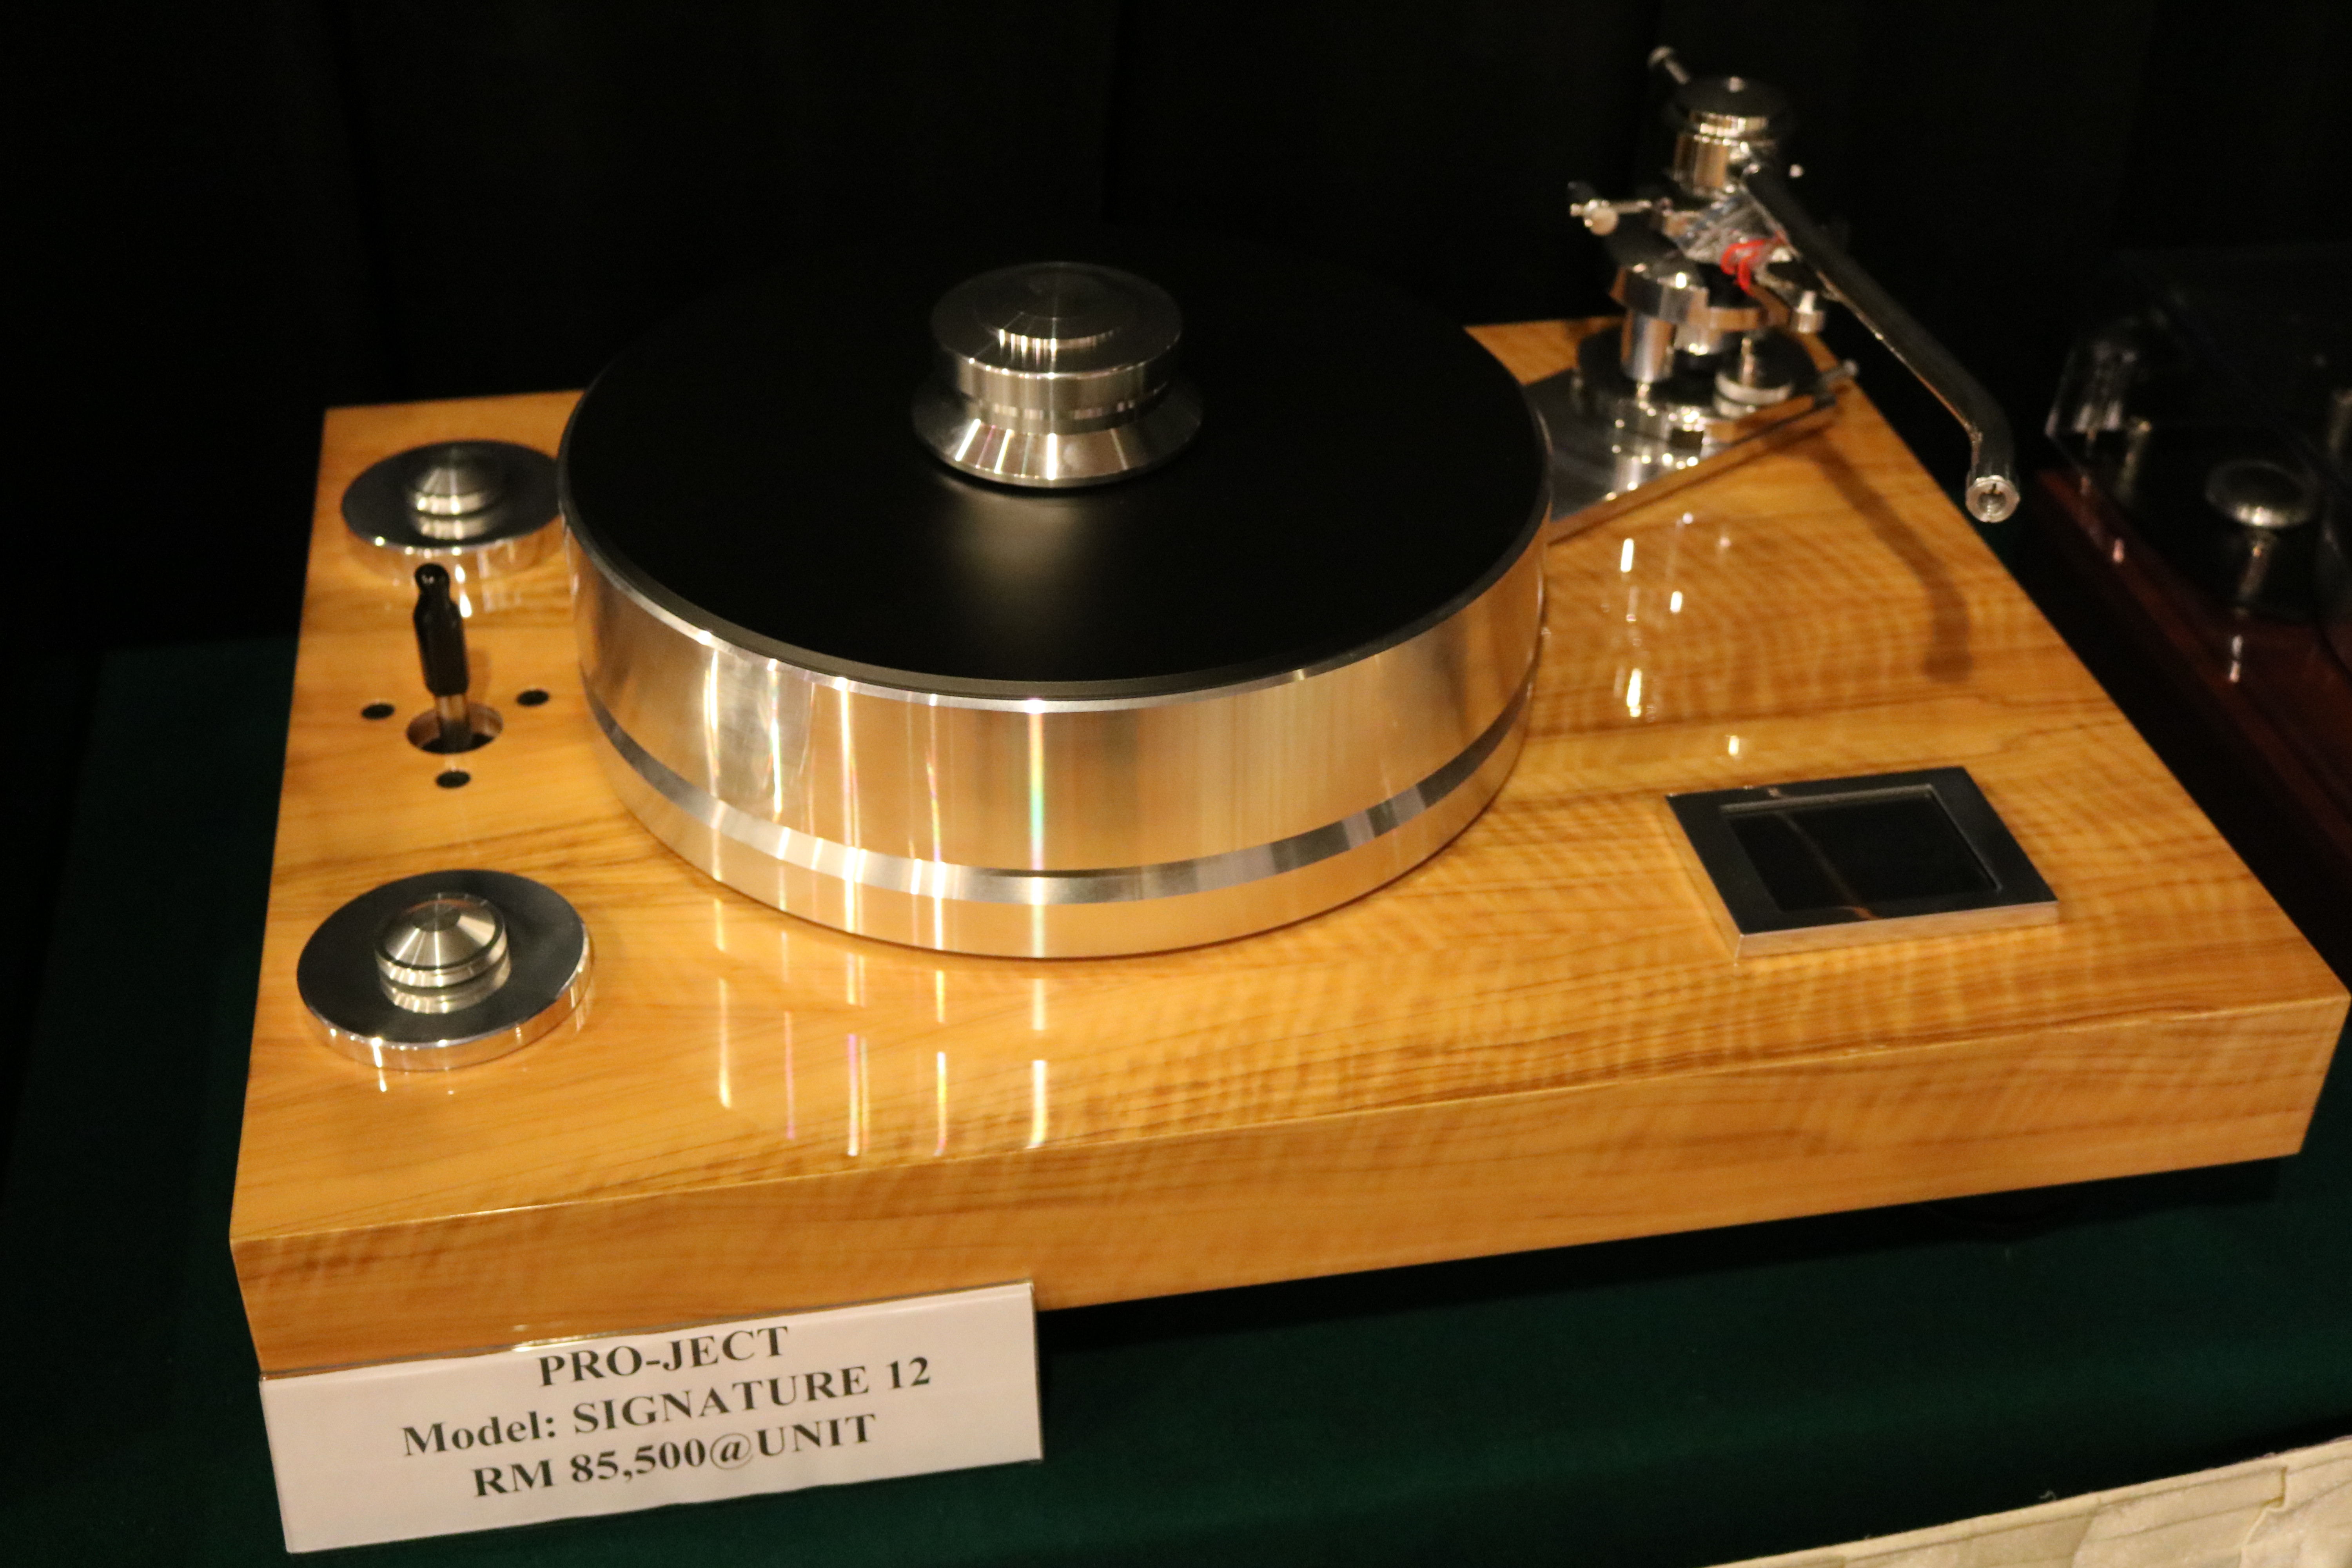 Pro-Ject Signature 12 turntable from DNA Audio.